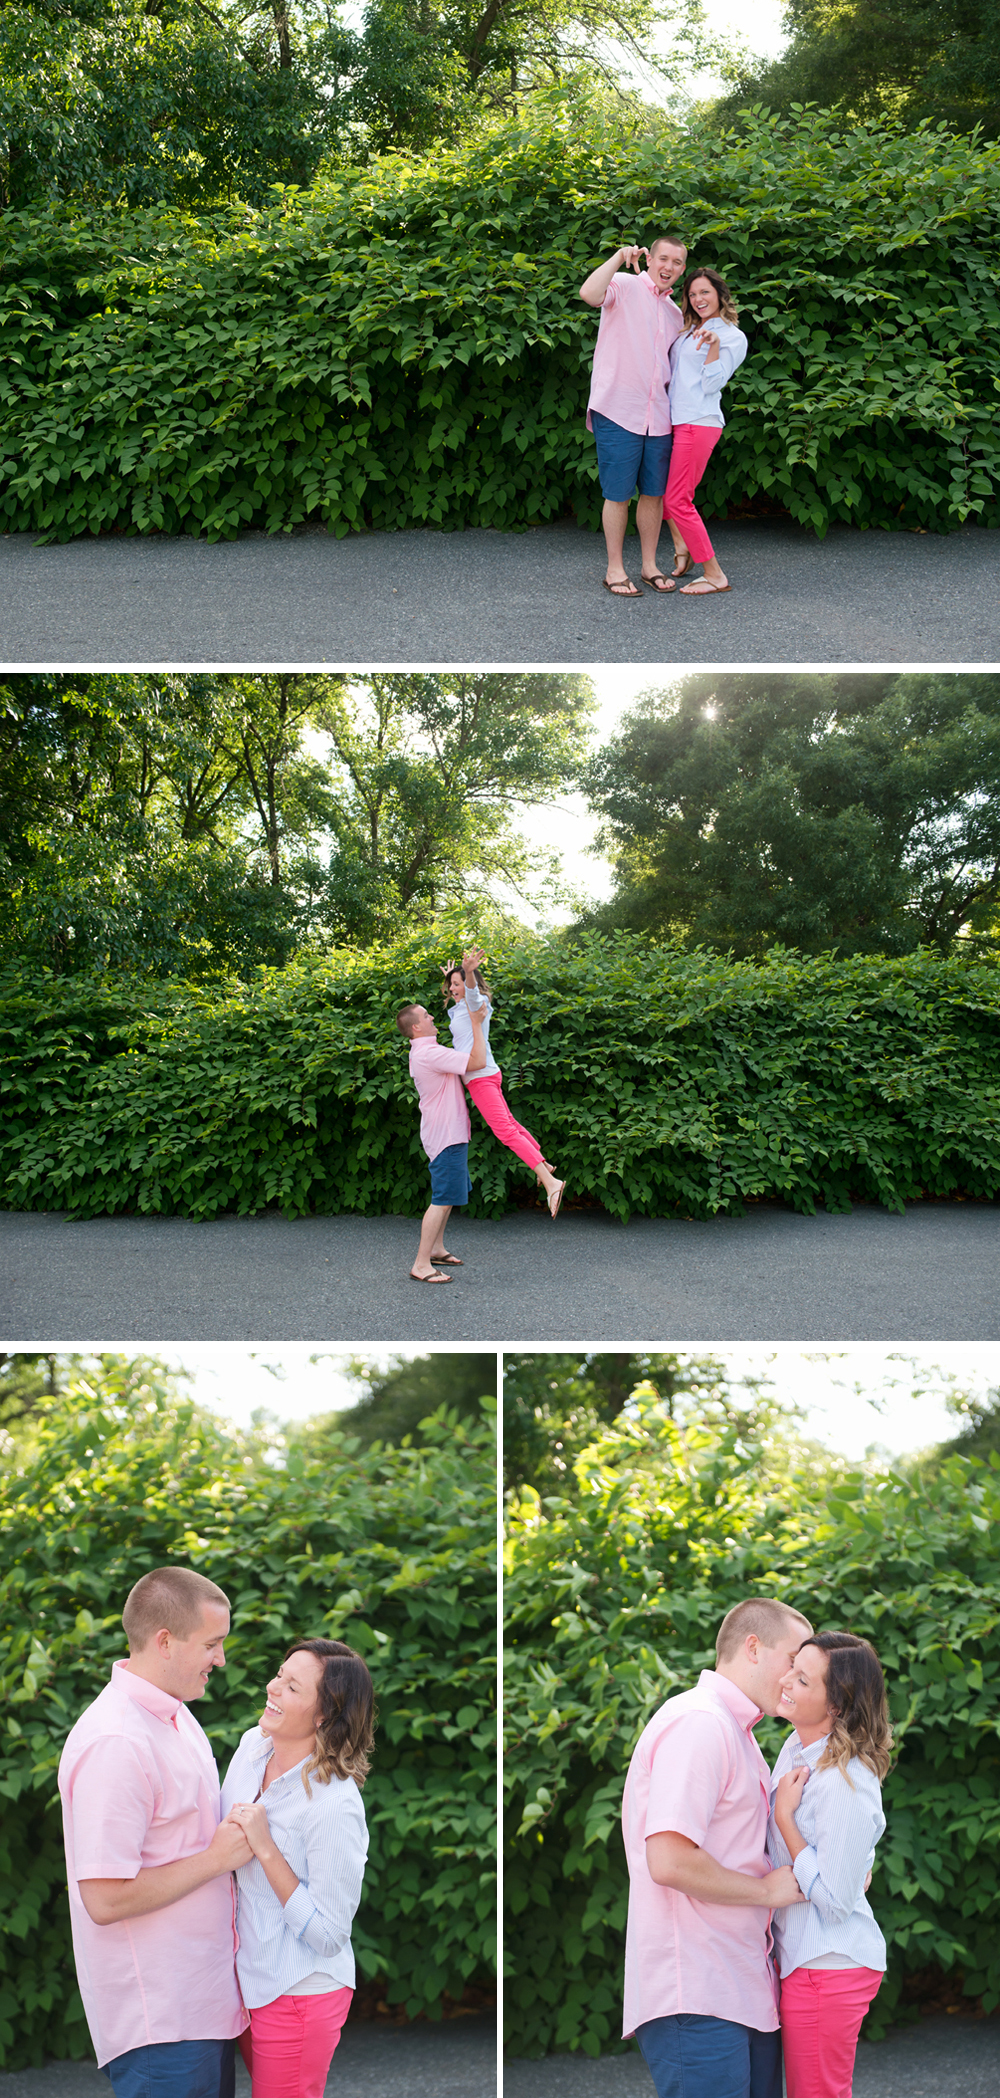 Harford_County_Engagement-03